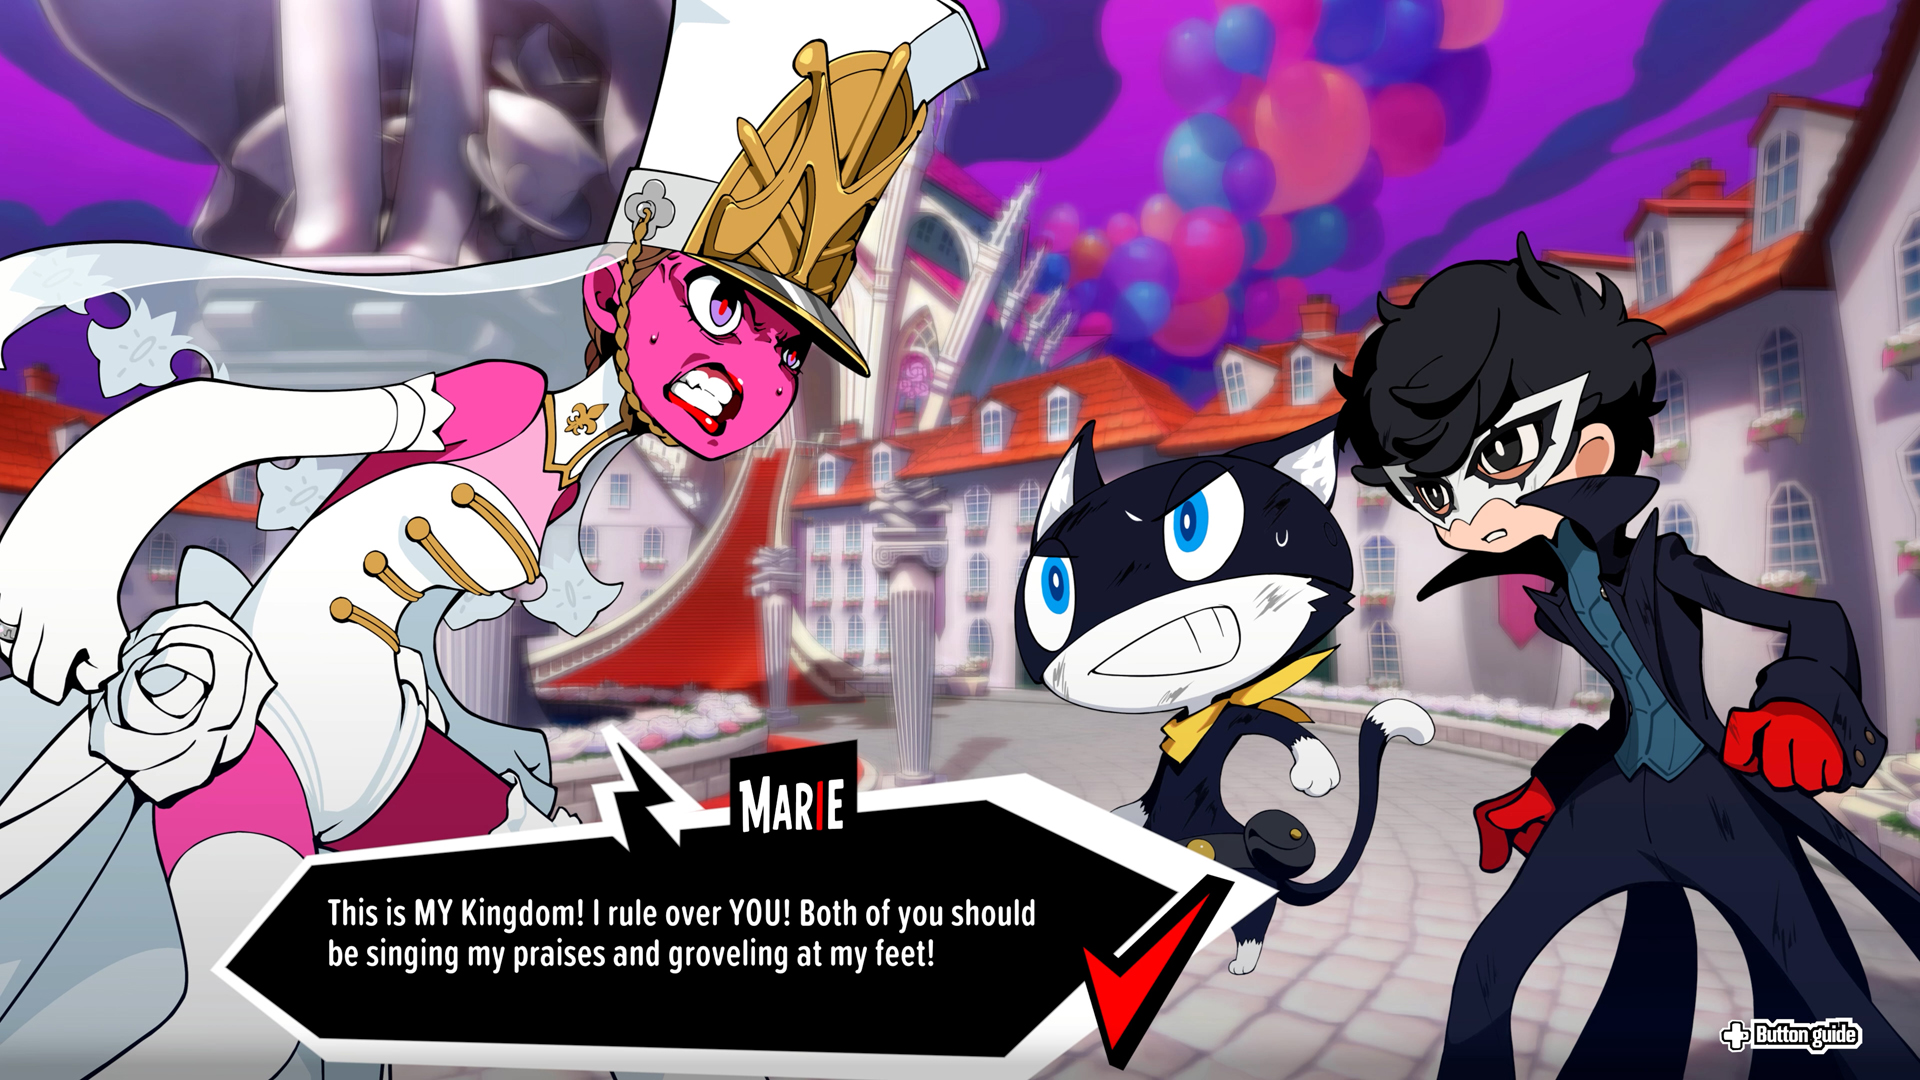 Atlus has revealed full story, character, gameplay, and combat details for Persona 5 Tactica (P5T) -- Erina, Marie, The Kingdoms Metaverse, Rebel Corps, Toshiro Kasukabe -- but Xbox gets no physical release.